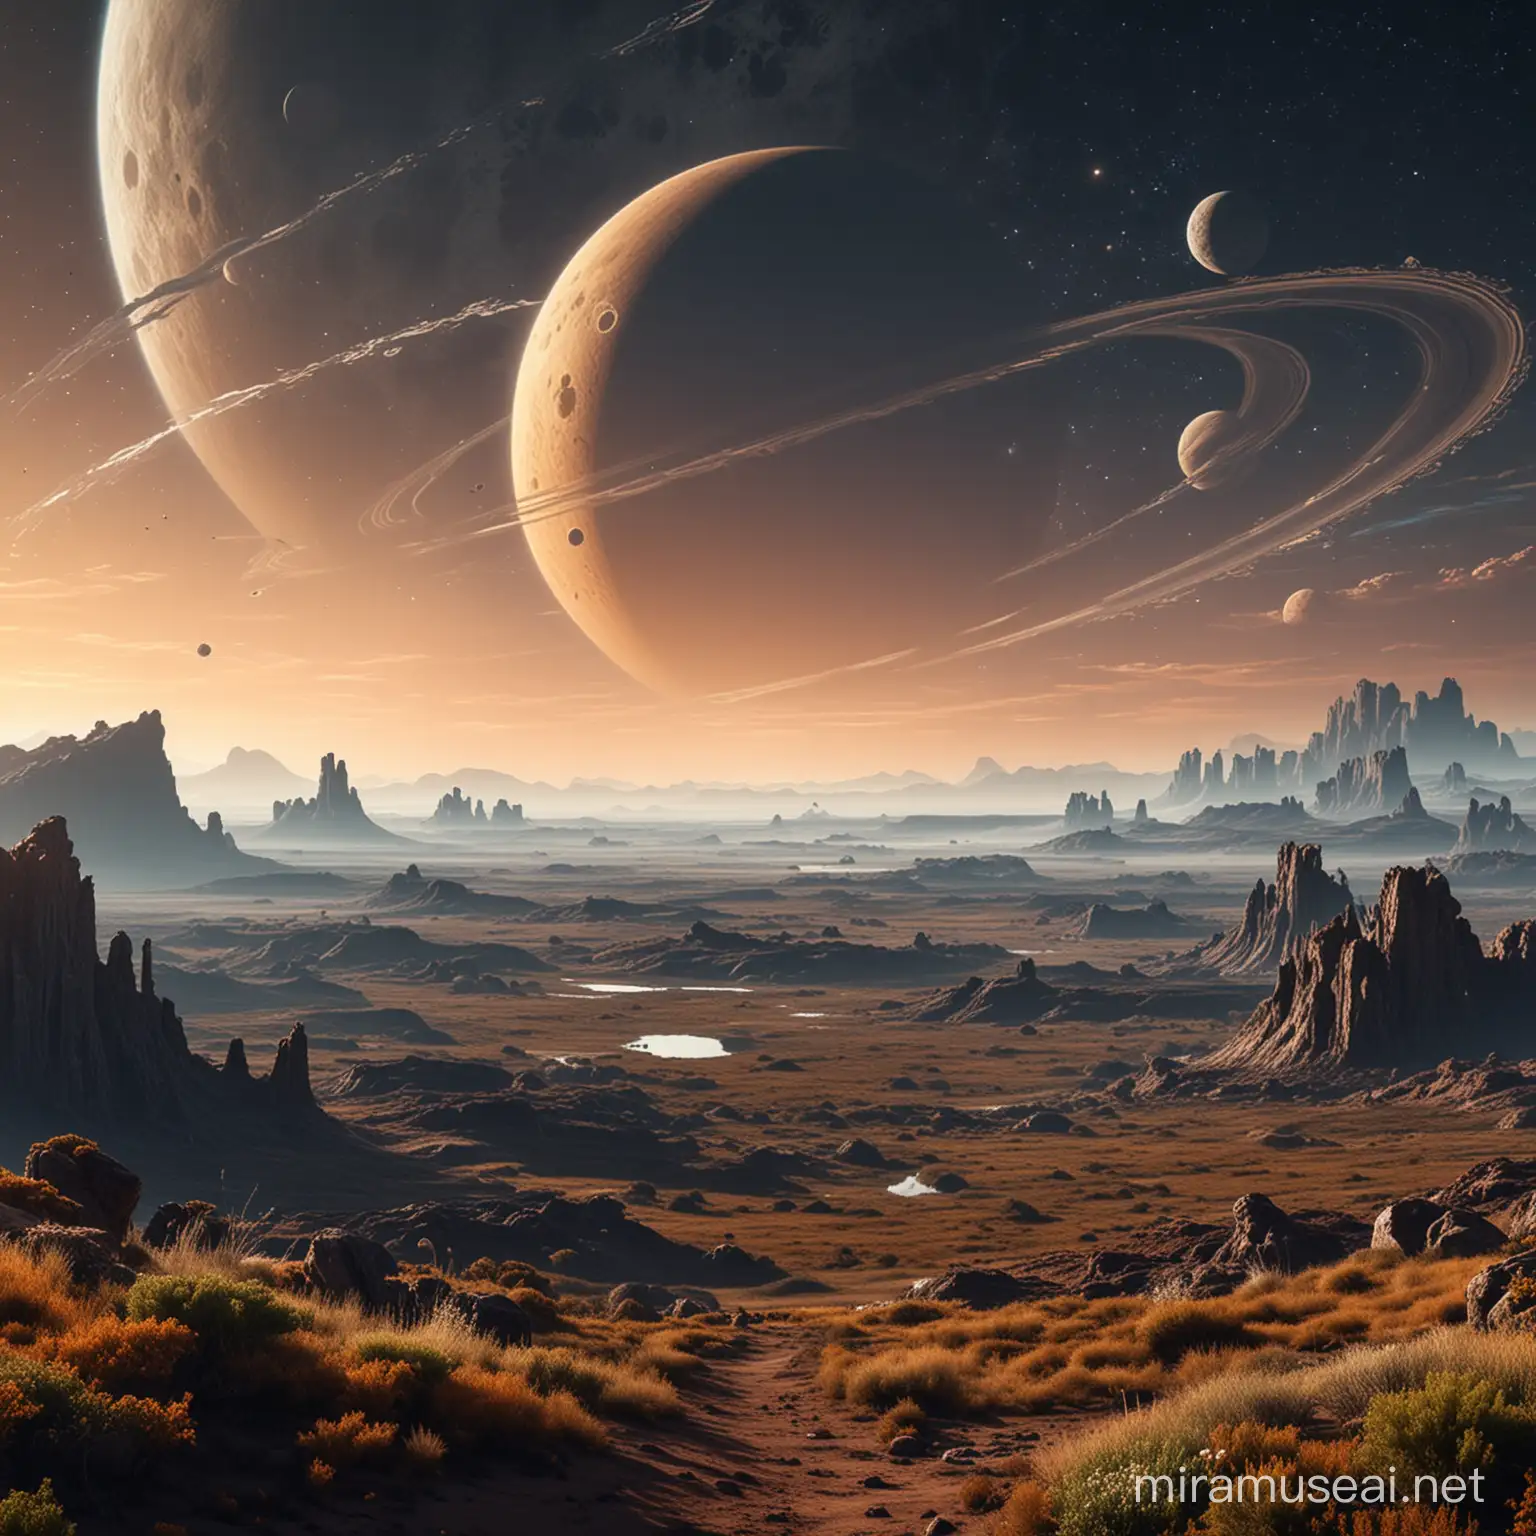 A beautiful landscape with vegetation from another planet, animals from another planet, and on the horizon a large planet with rings, like saturn and the moon next to it.